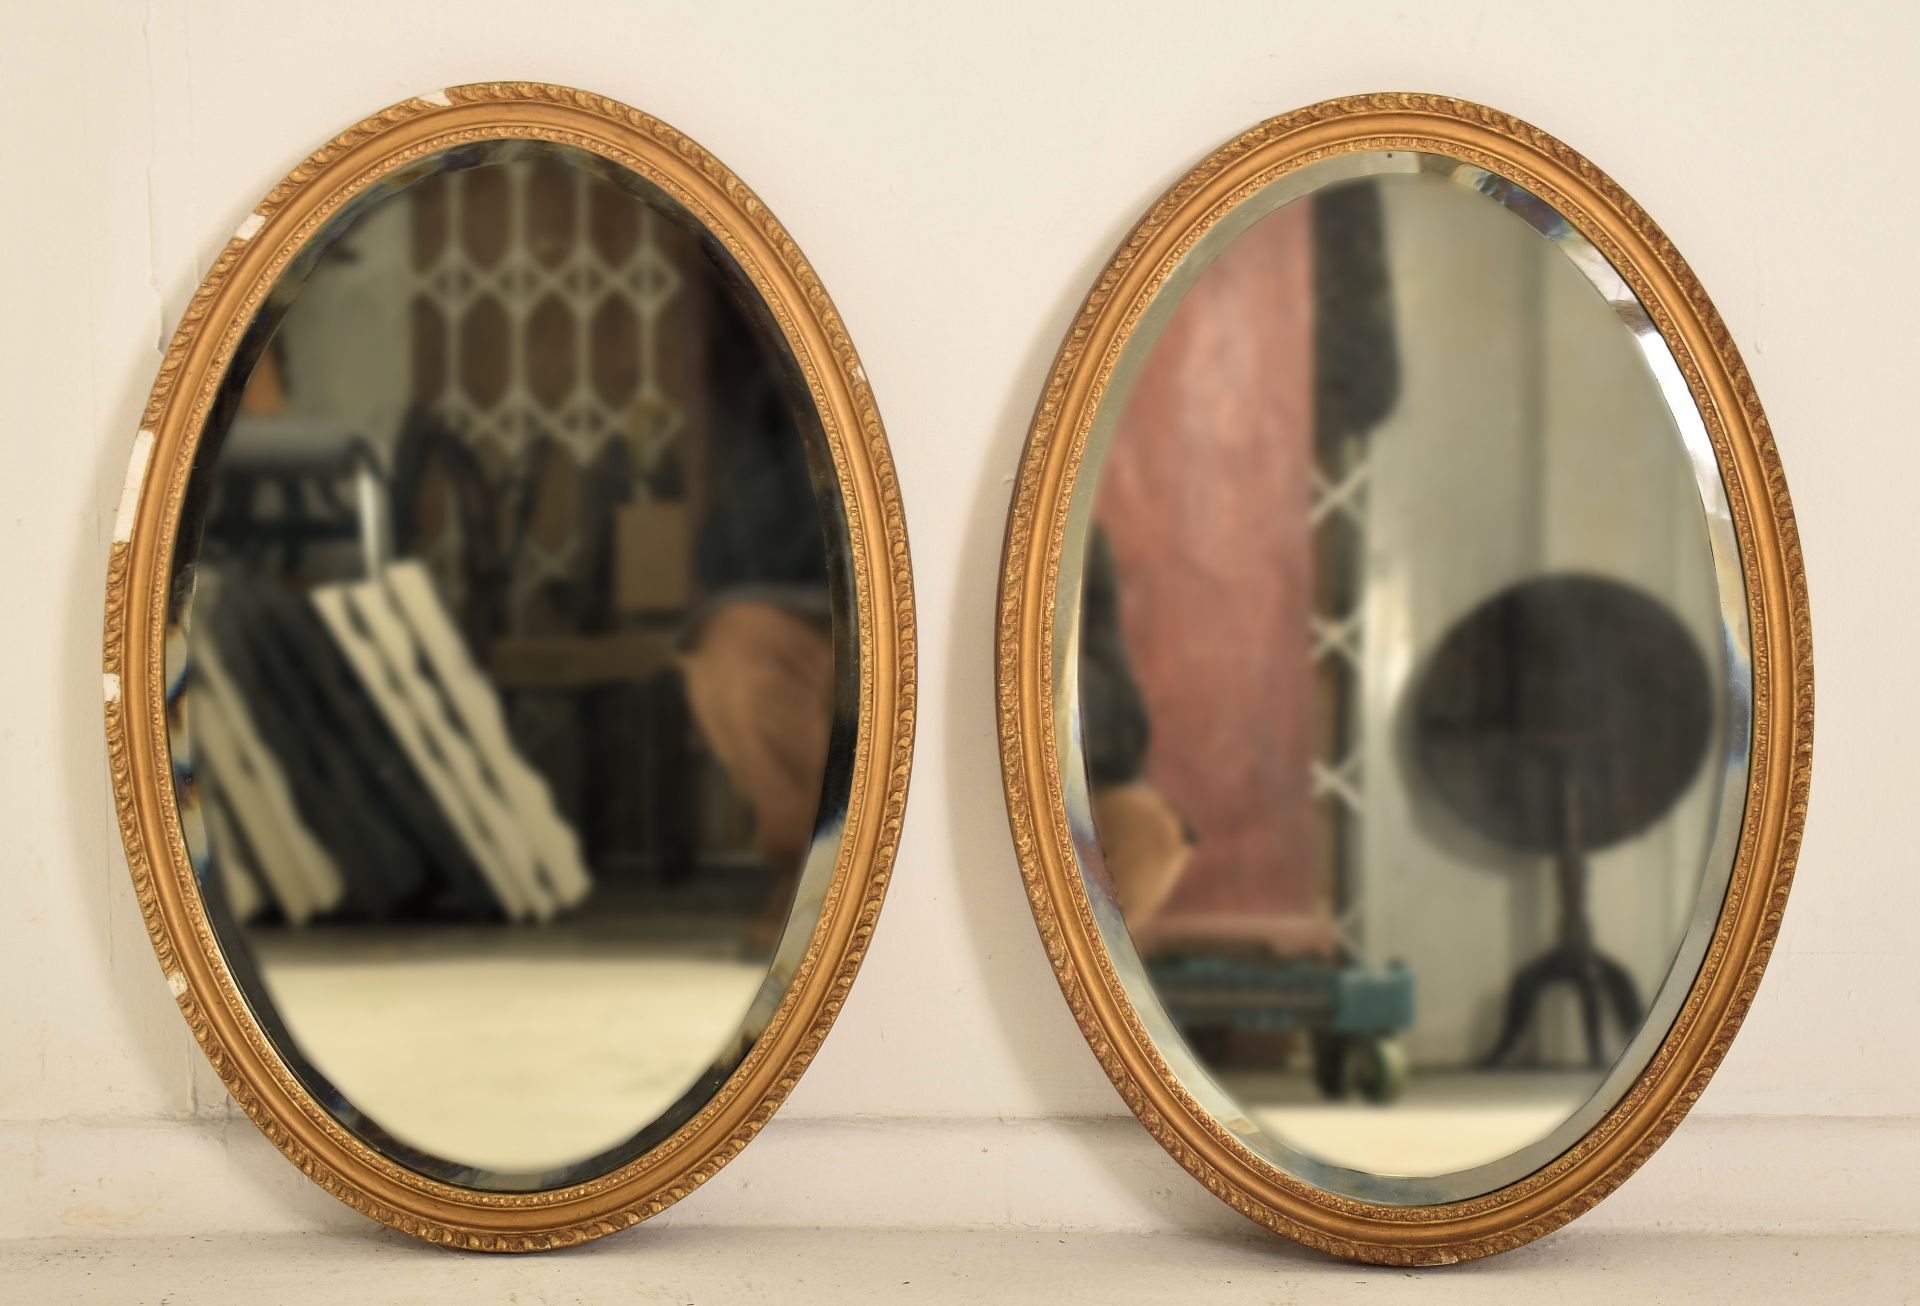 PAIR OF LATE VICTORIAN GILT GESSO & WOOD OVAL WALL MIRRORS